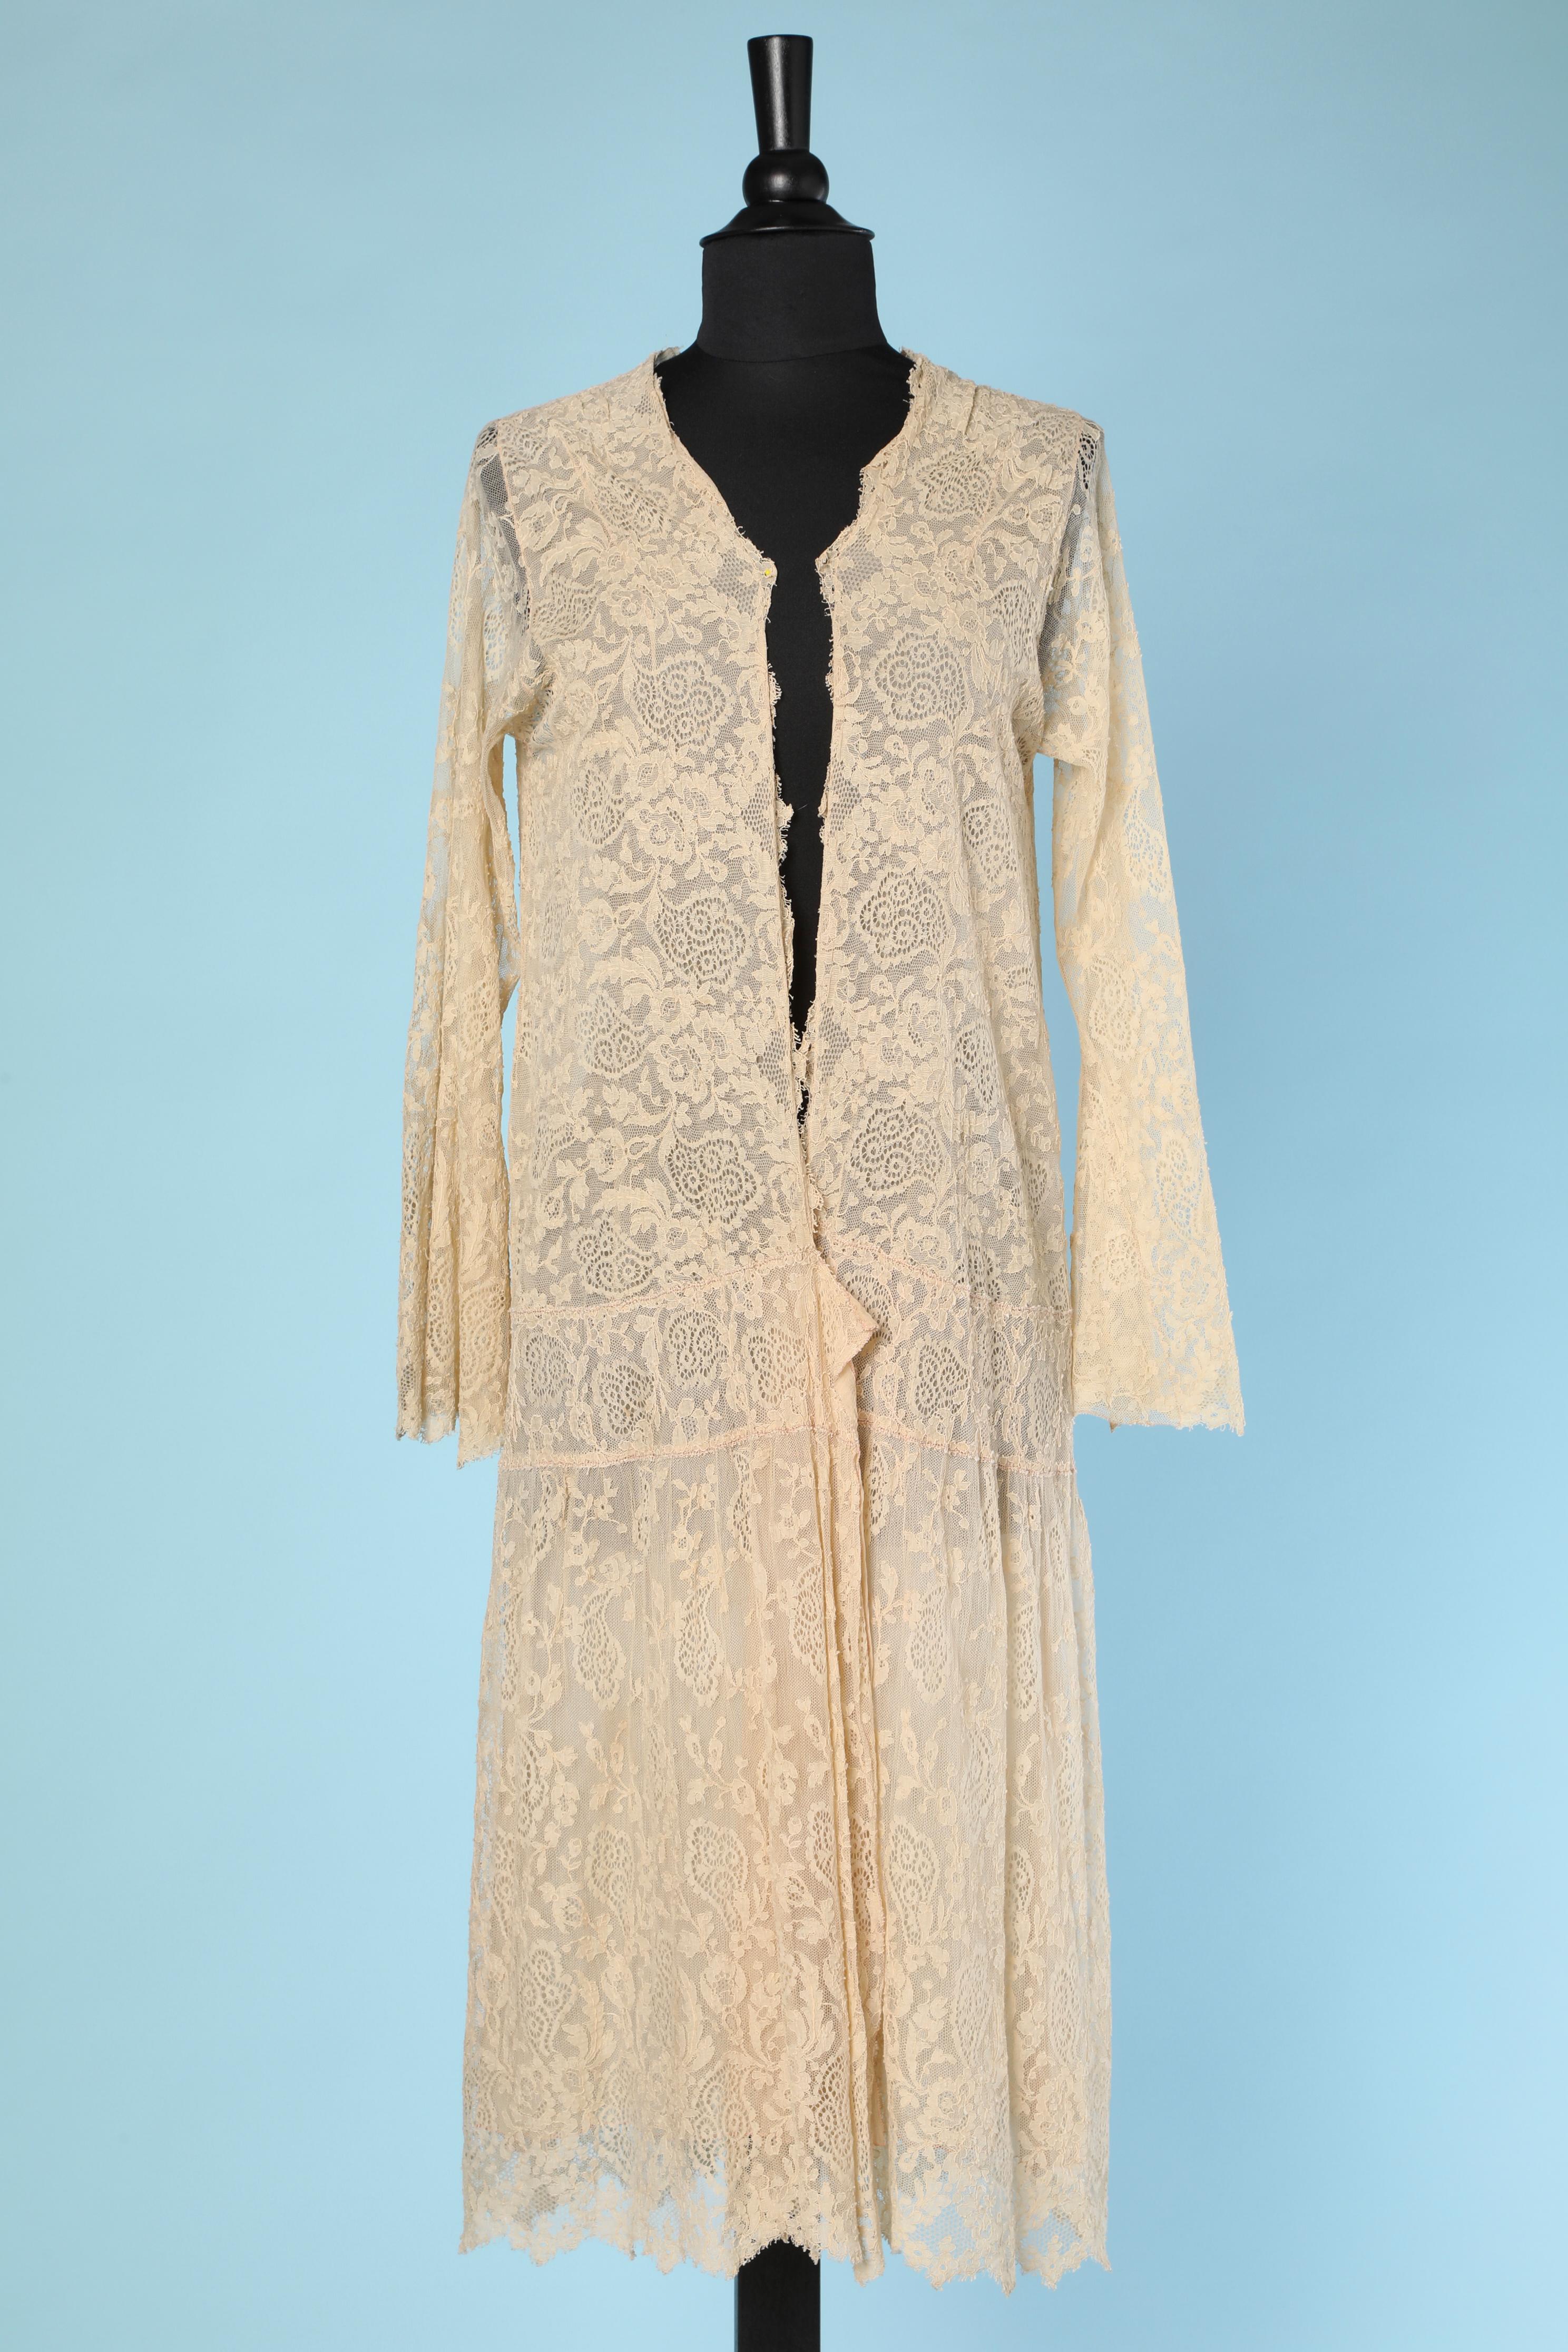 1930's lace and silk chiffon deshabillé . No lining inside the sleeves ( see-through) Cut-work on the hips.
SIZE L 